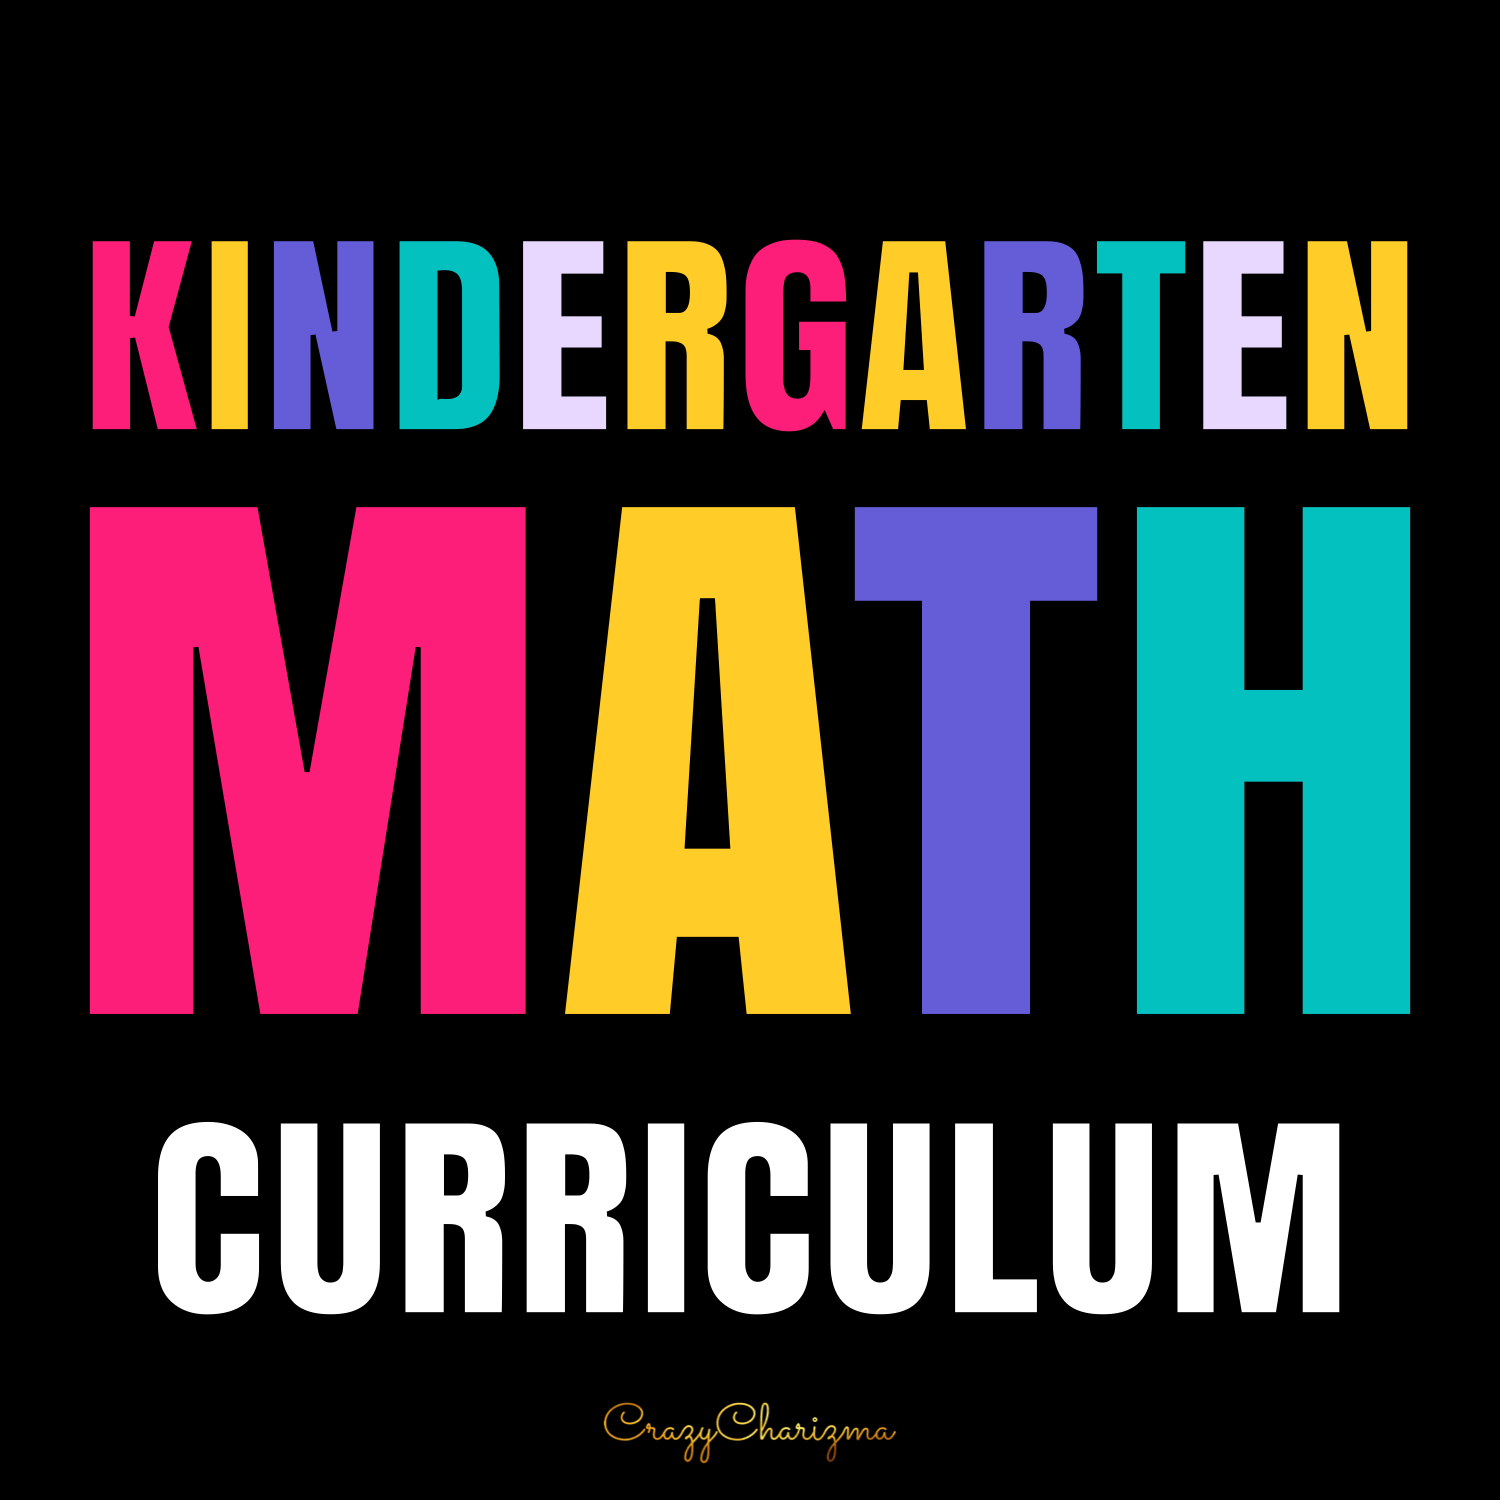 Want not to worry about what activities to use so that kids would practice kindergarten math? Take advantage of this KINDERGARTEN MATH BUNDLE! It includes activities to practice every math topic taught in kindergarten! Worksheets, games, centers, hands-on, and much more!